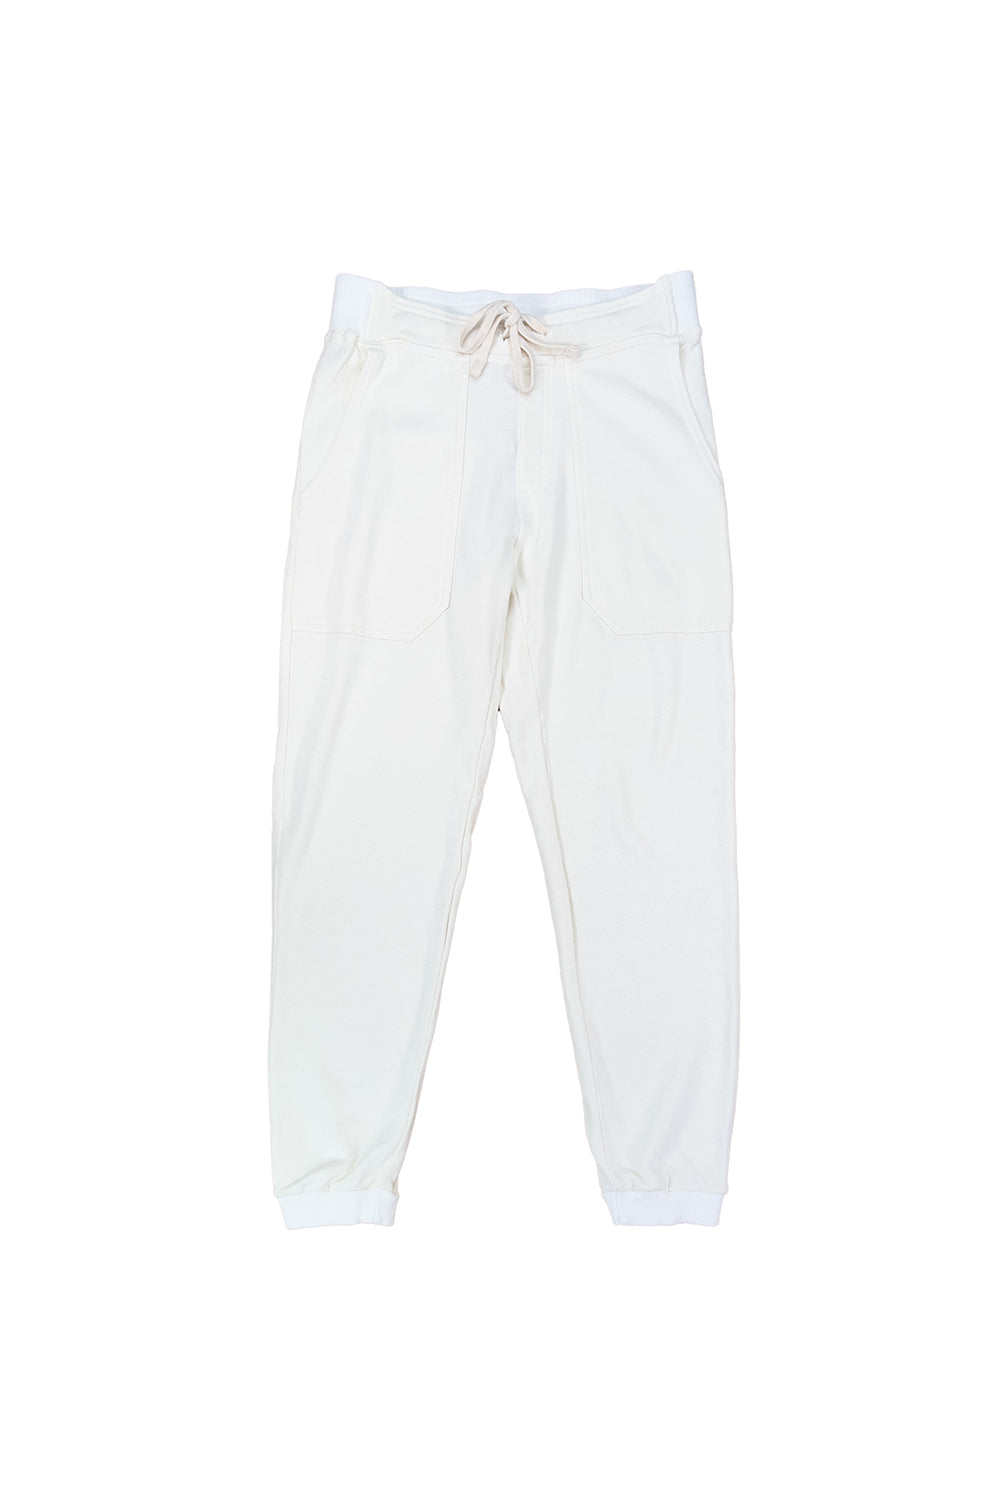 Rockaway Sweatpant | Jungmaven Hemp Clothing & Accessories / Color: Washed White